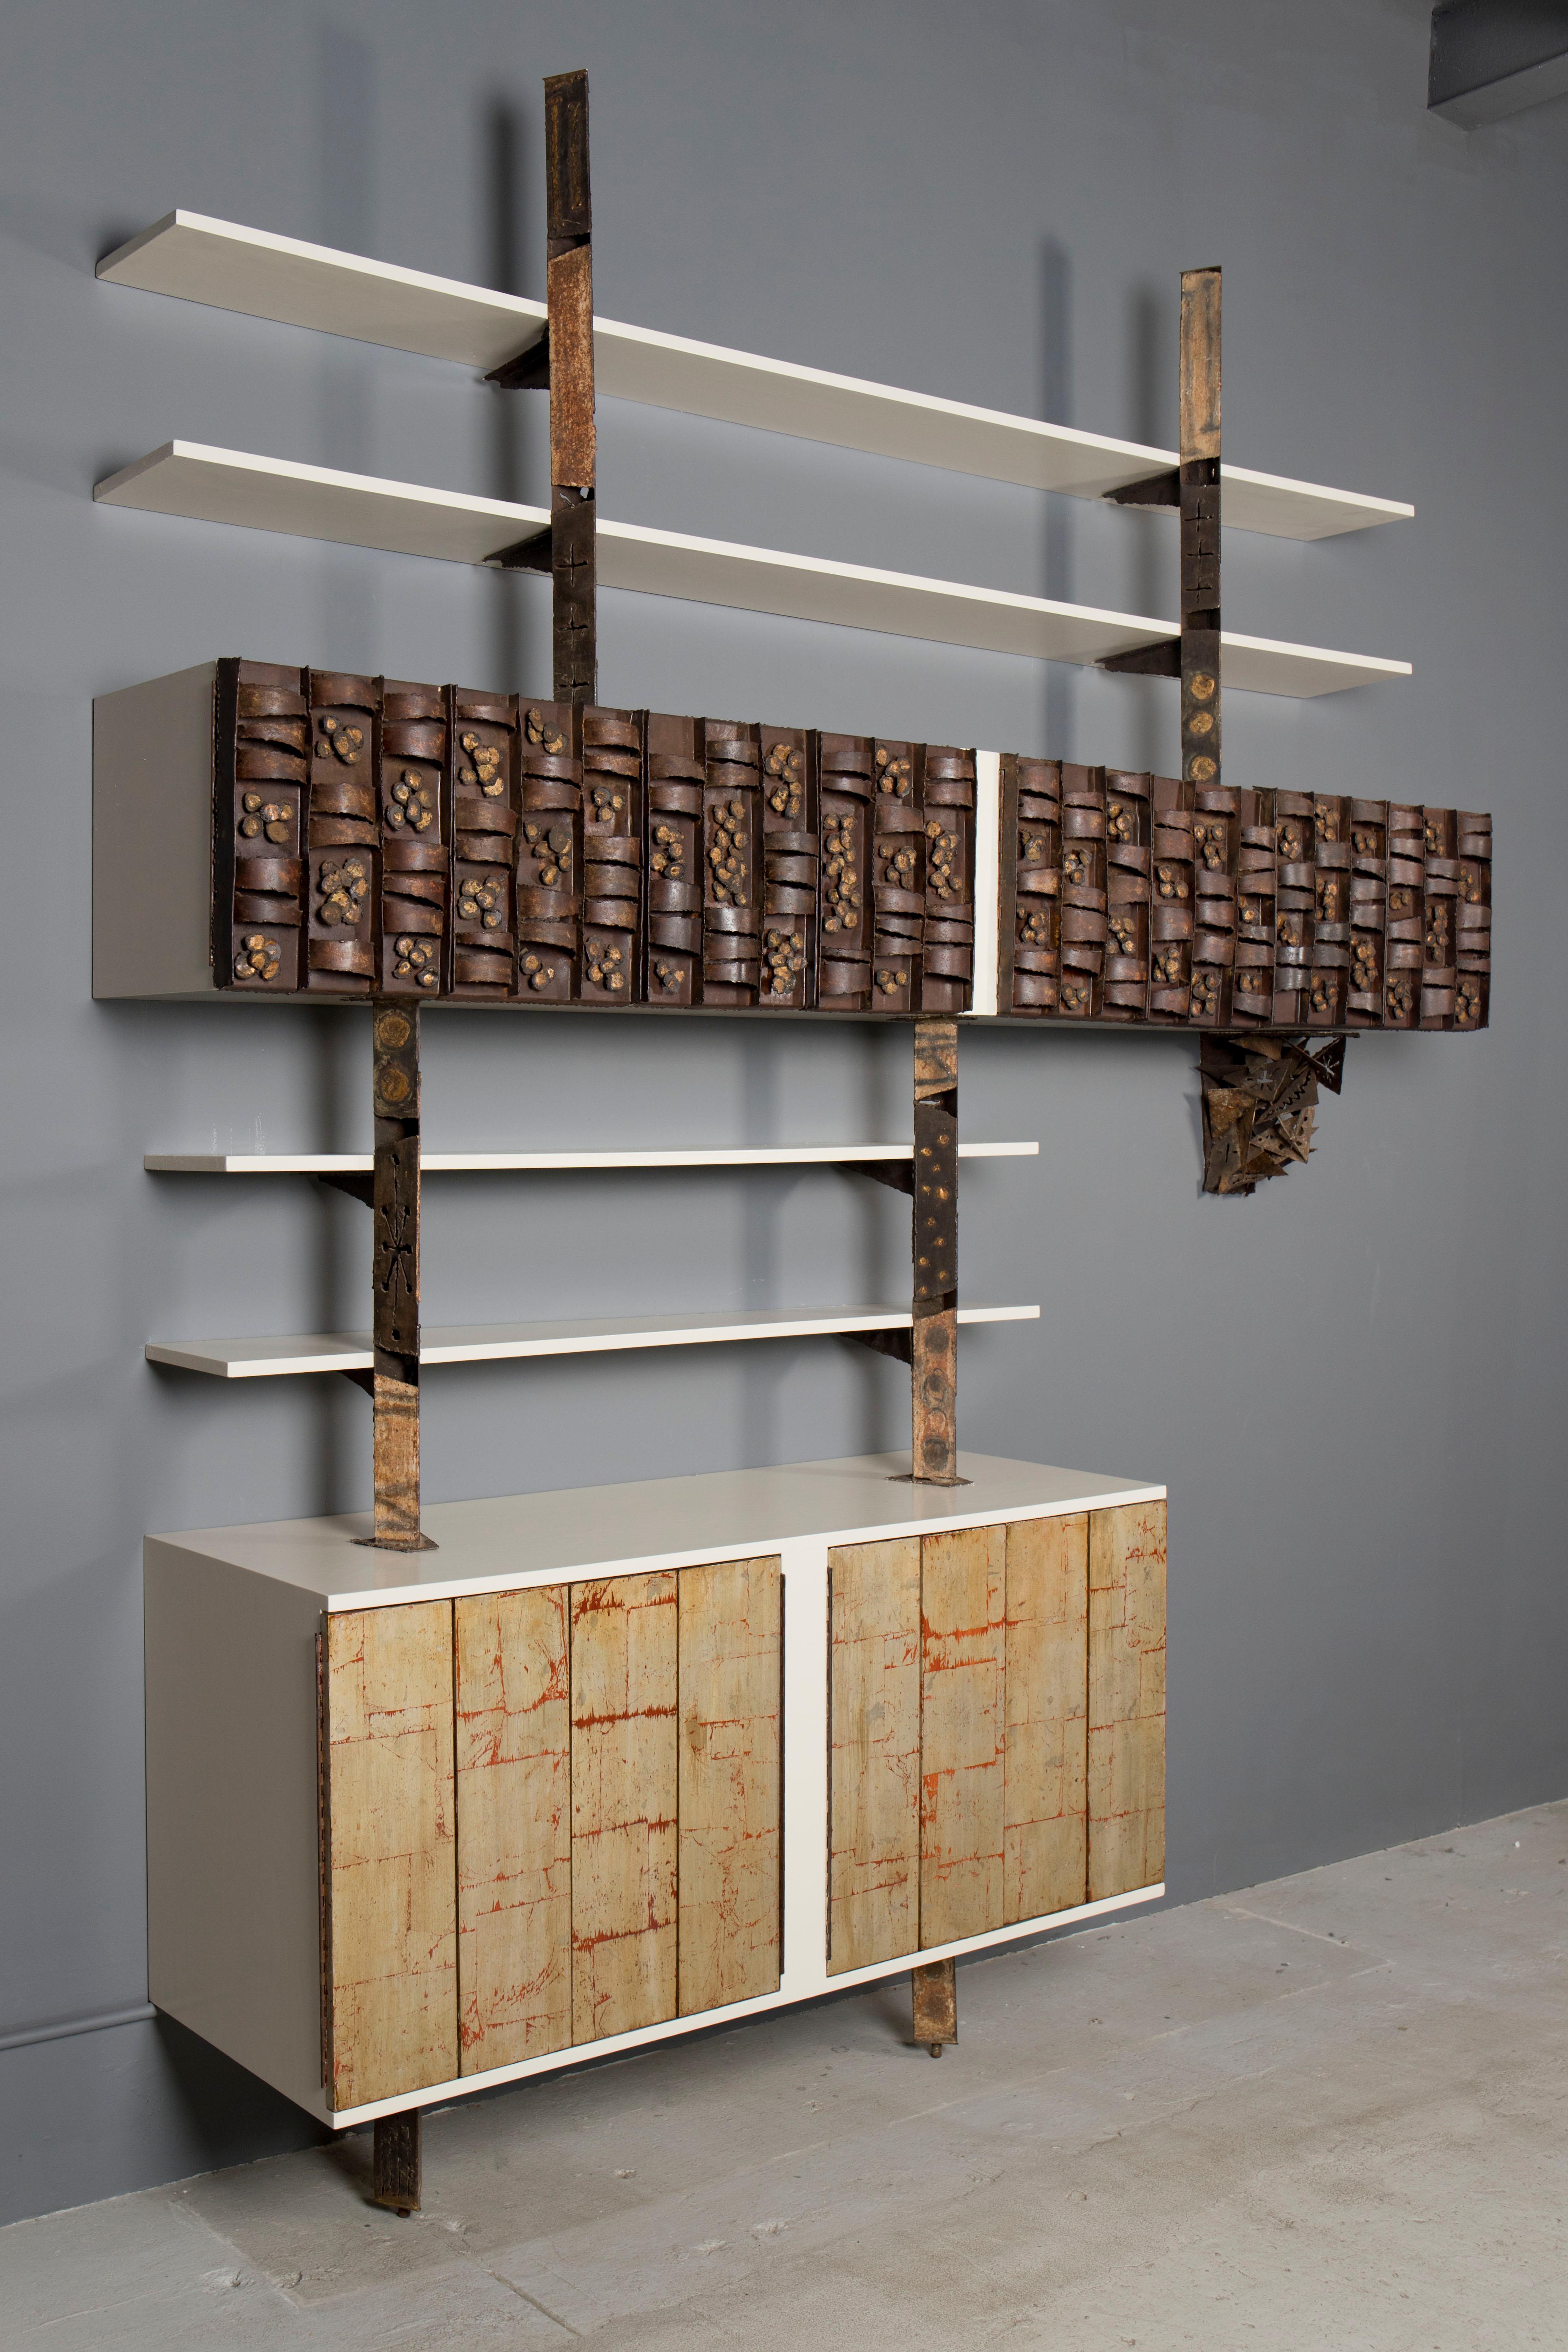 Unique wall - hung cabinet, collaboration between two great American studio artists - Paul Evans and Phillip Lloyd Powell.
Upper part showcases Evan's brutalist torch-cutting, welding and enameling technics, and the lower, Powell's wood gilding,